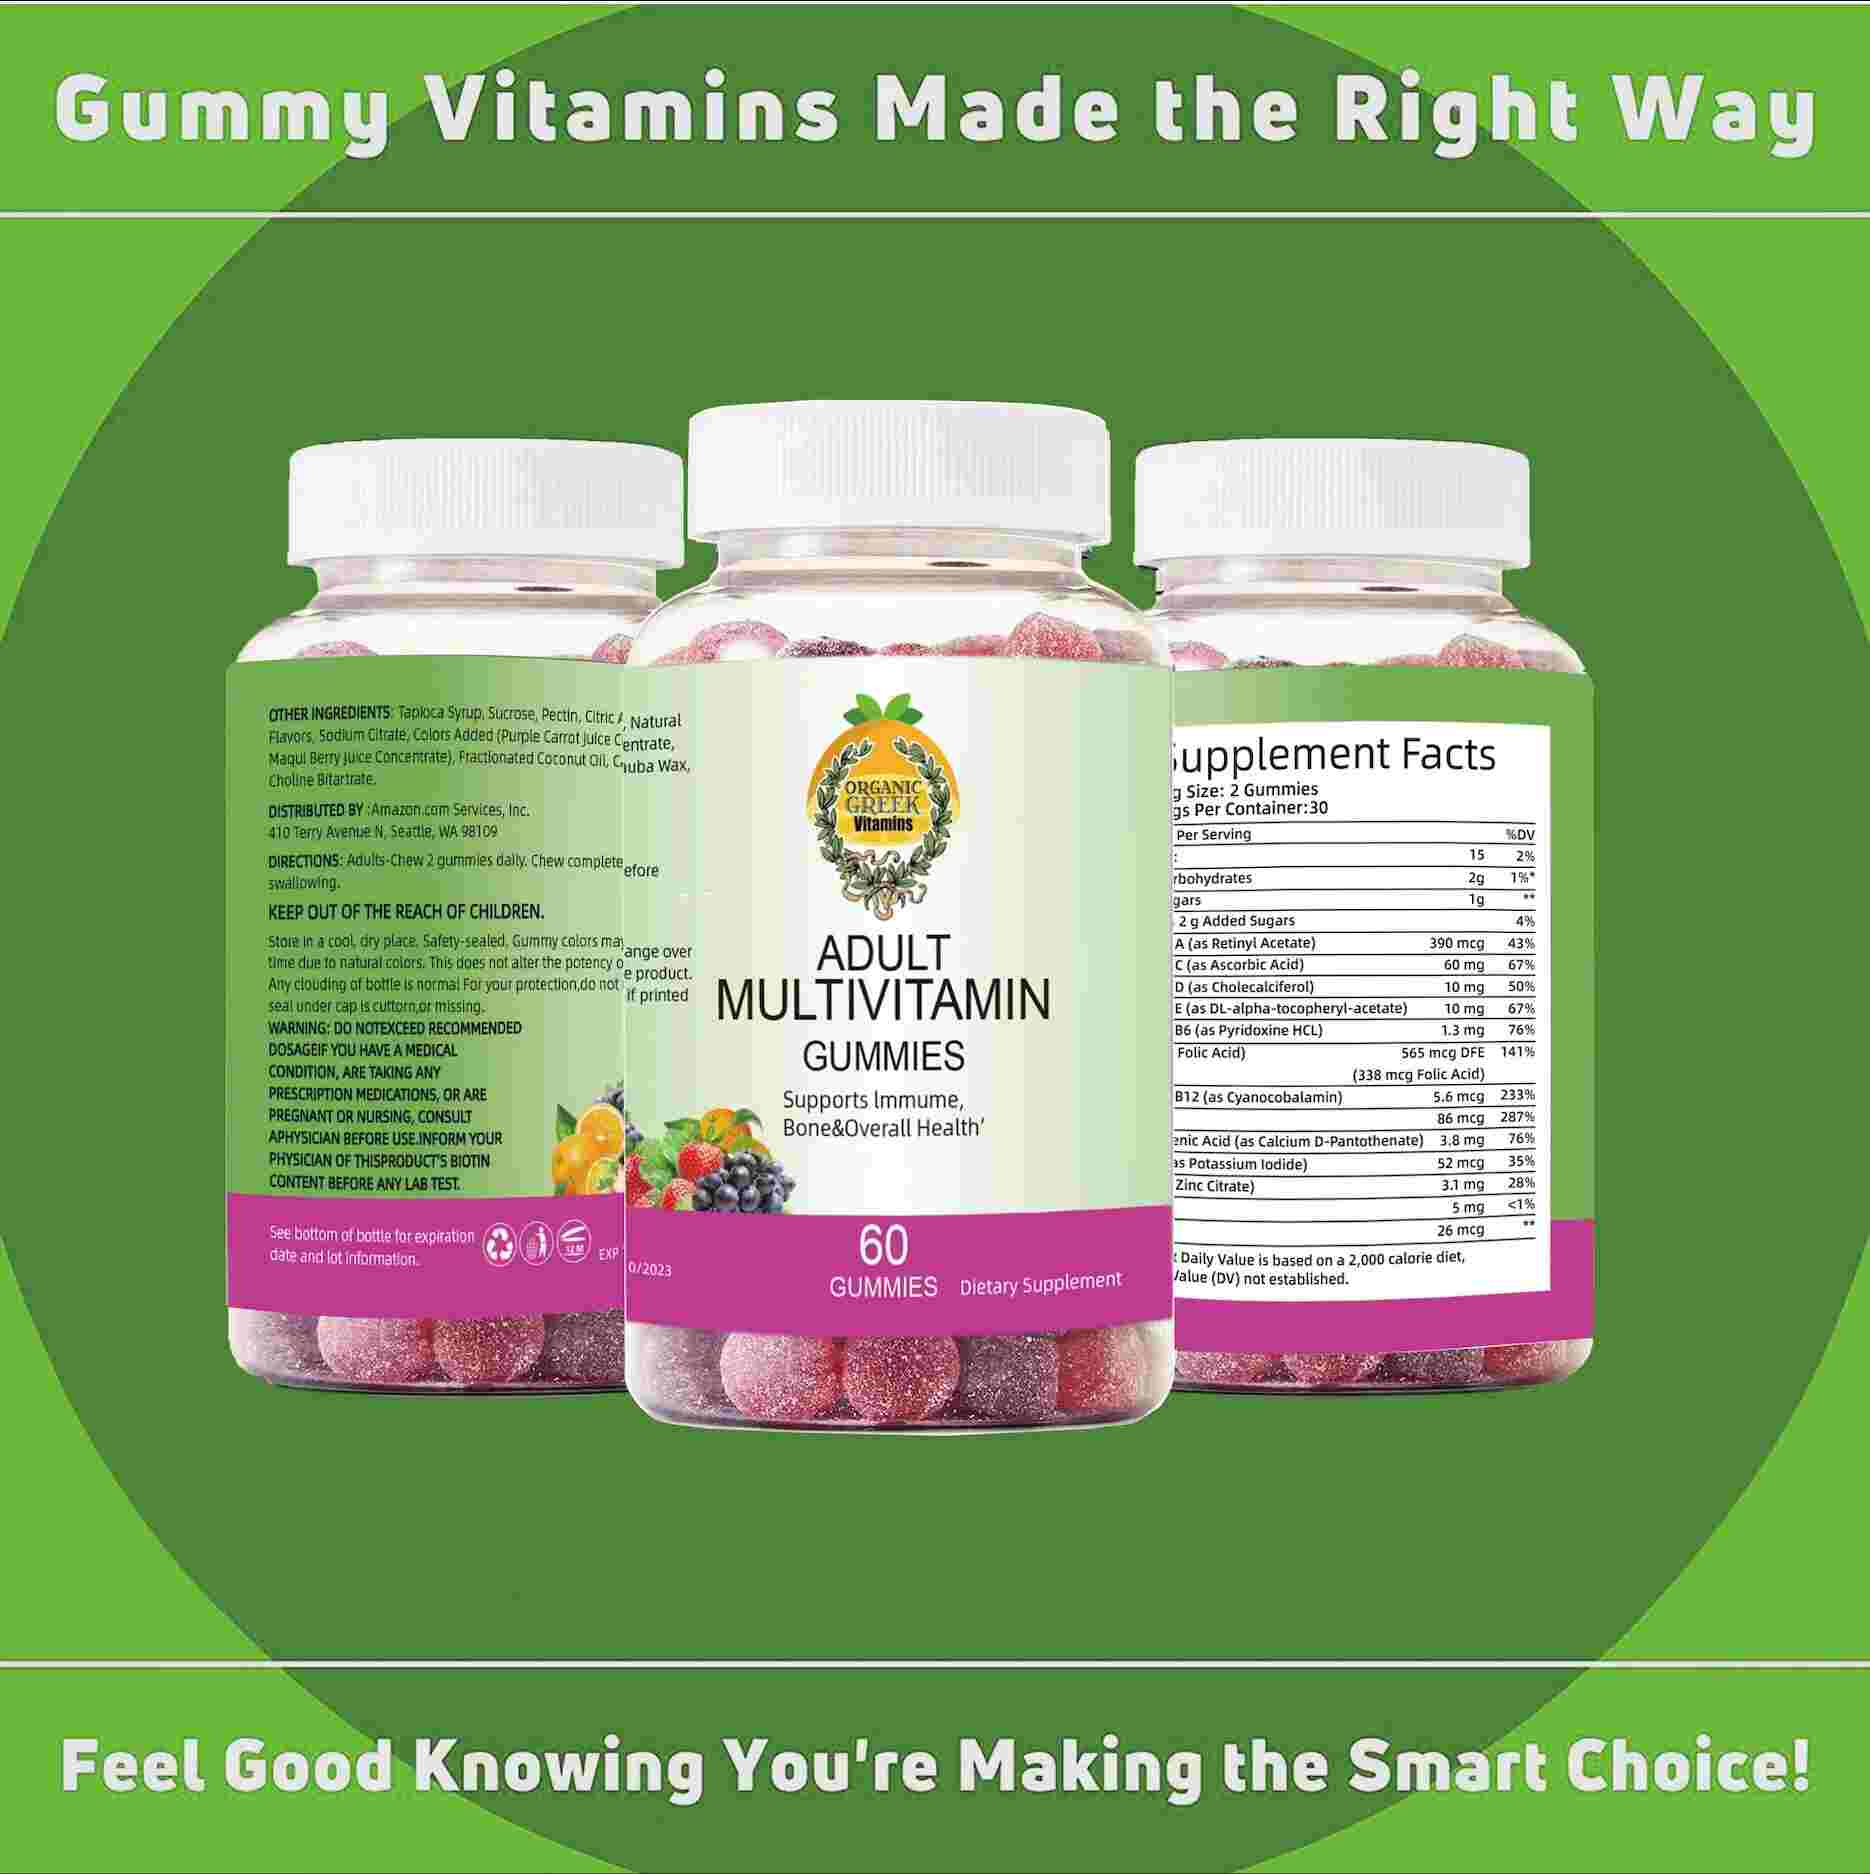 10 Benefits of Natural Multivitamin Gummies You Didn’t Know